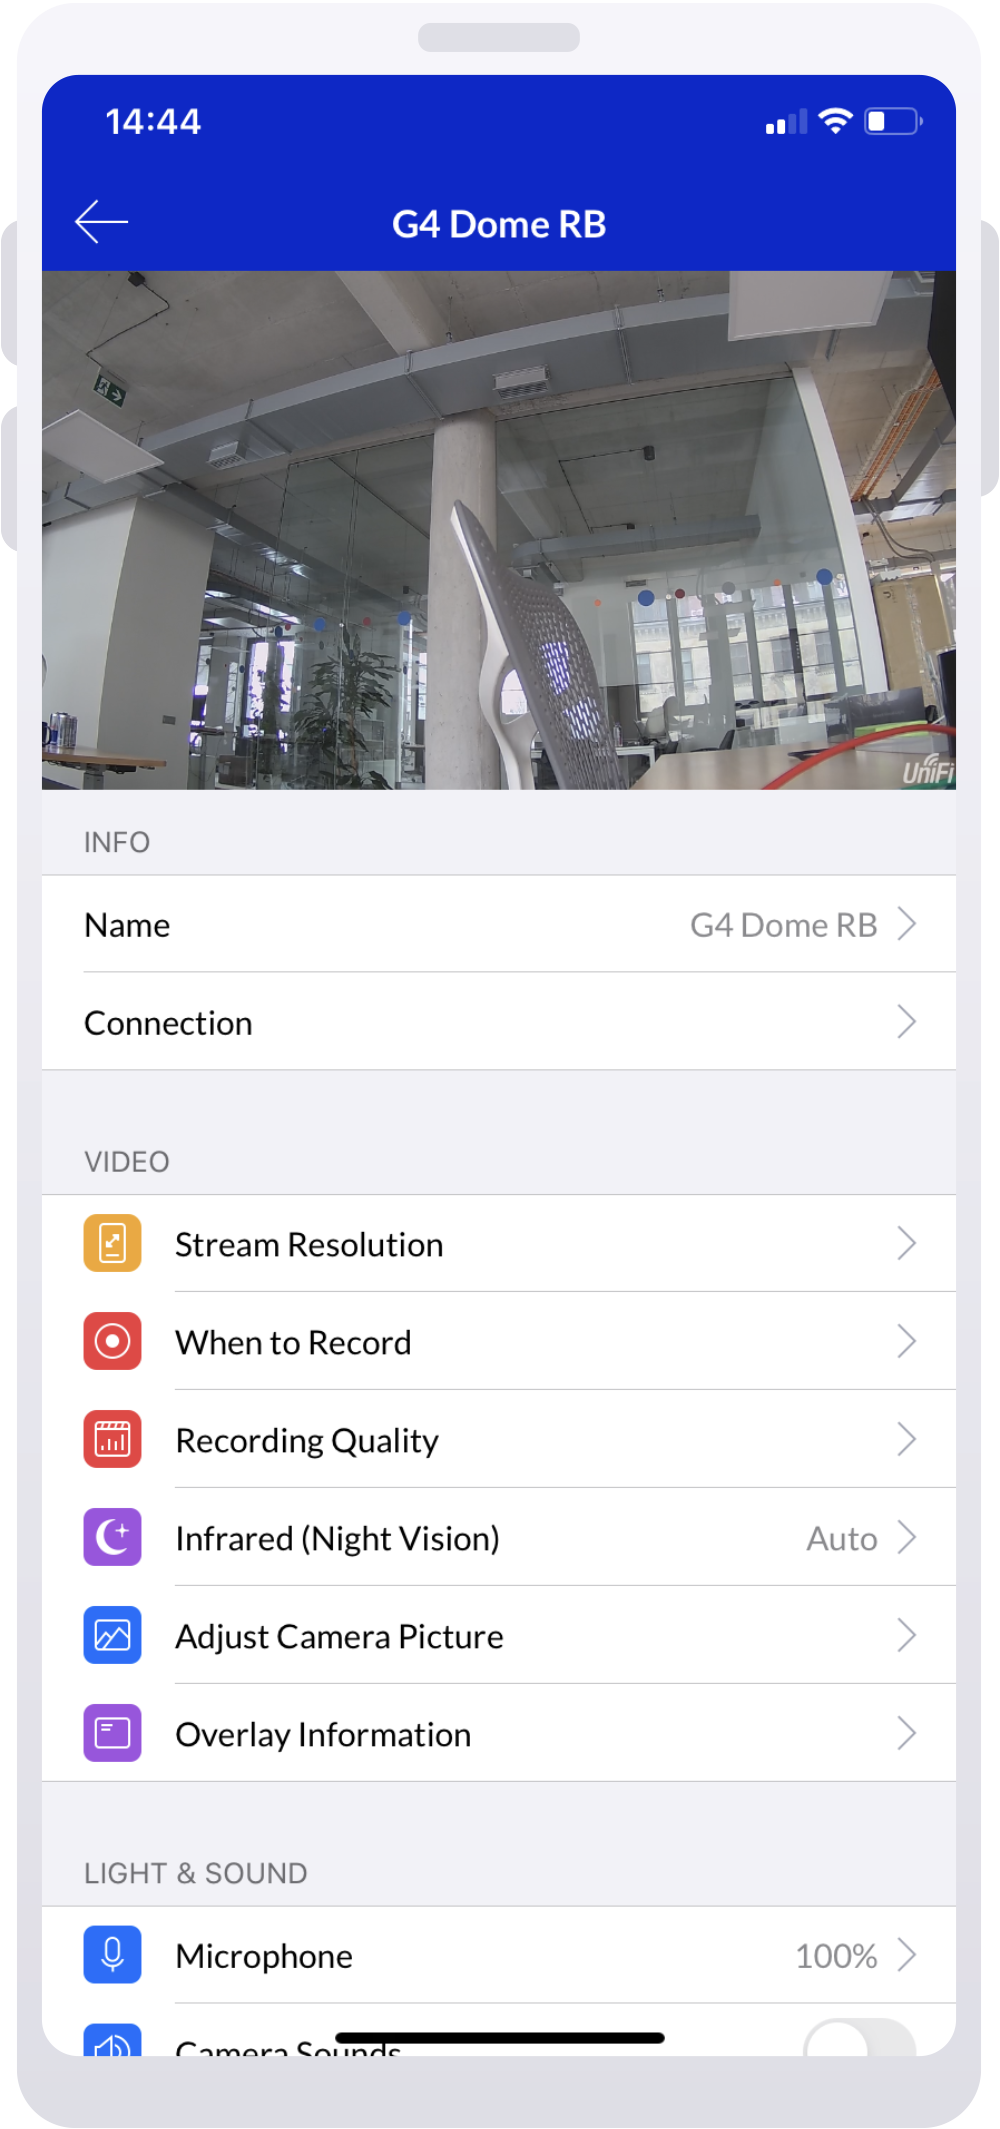 UniFi_Protect_View_camera_streams_and_manage_recordings_image_quality_settings_11.png